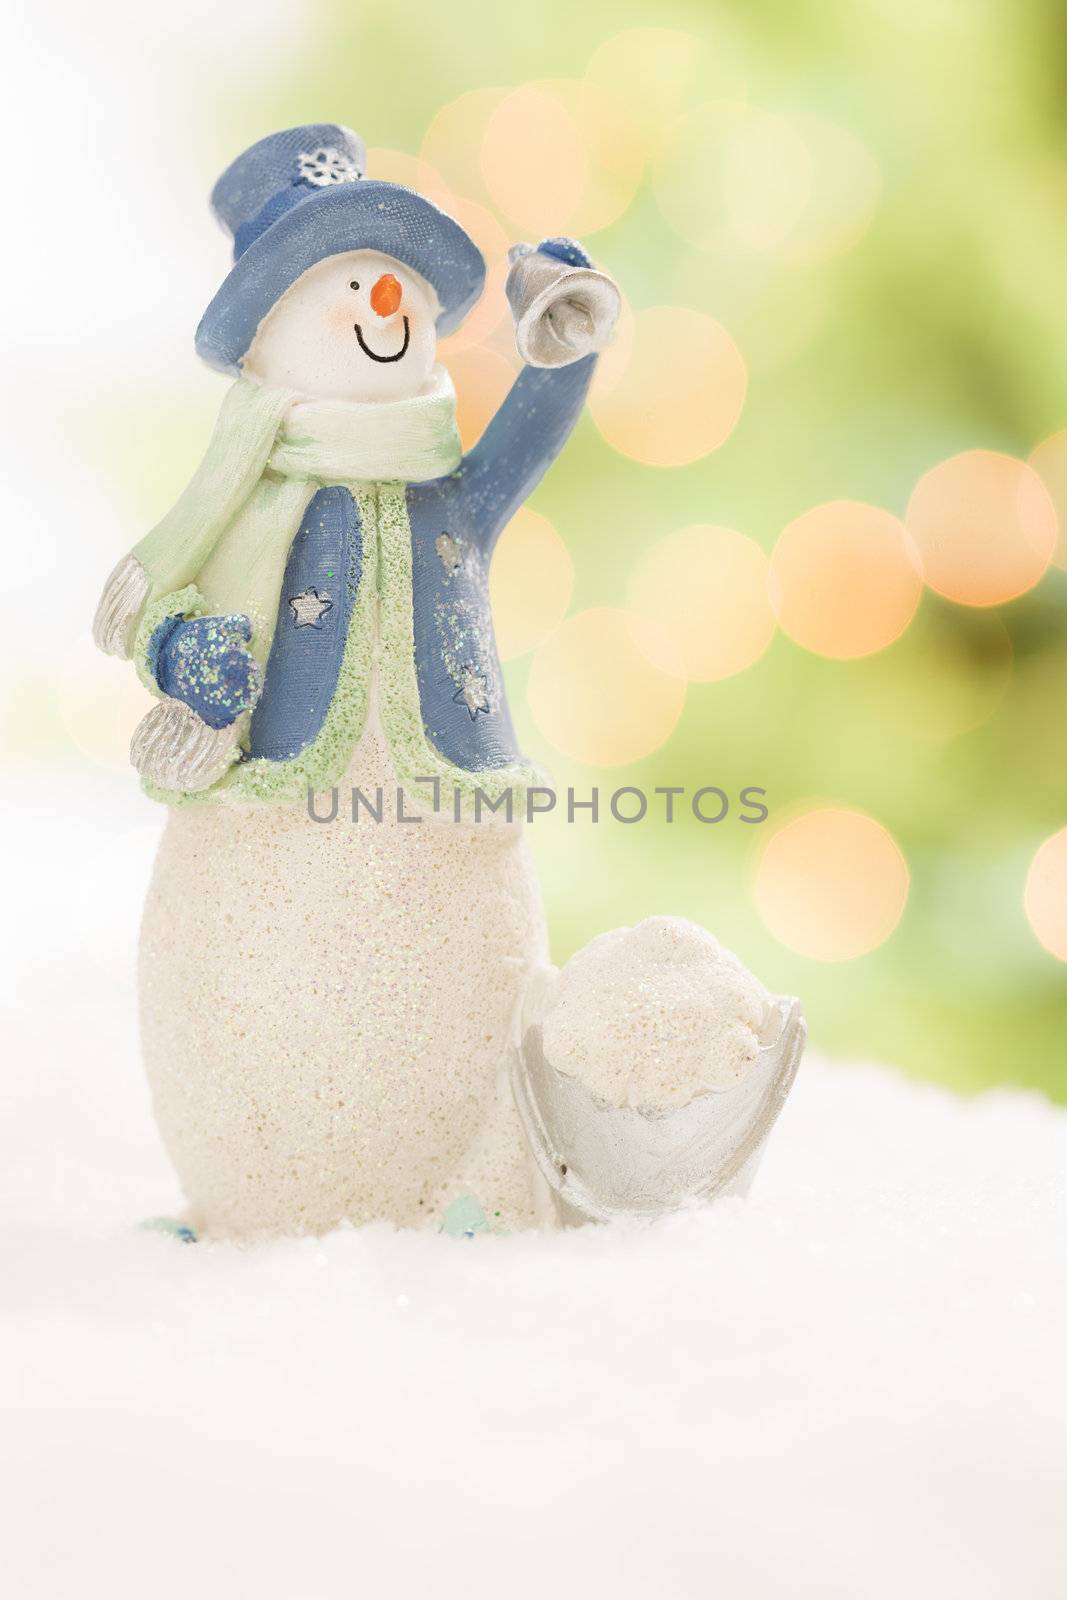 Snowman Statue On Snow Over a Blurry Abstract Green and Gold Background.